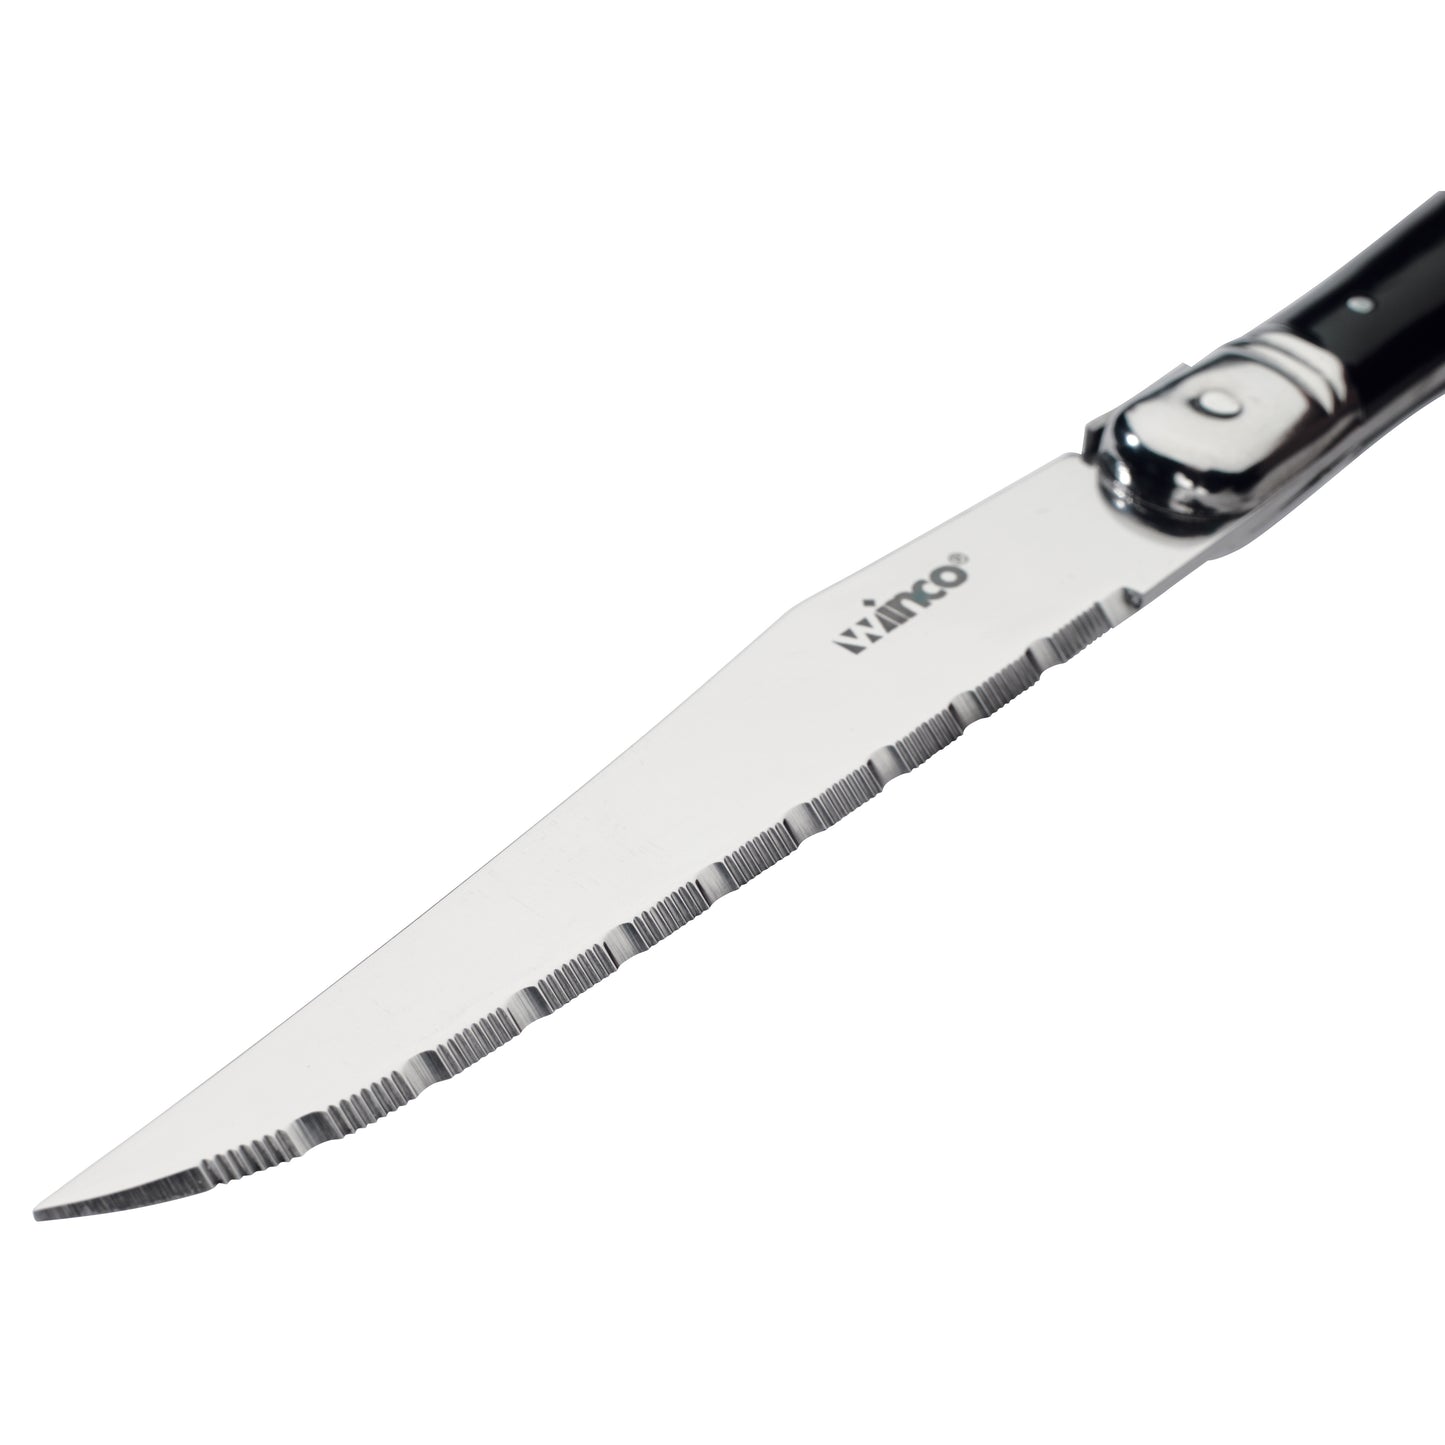 Euro Slim Steak Knives, 4-3/4" Blade with Pointed Tip